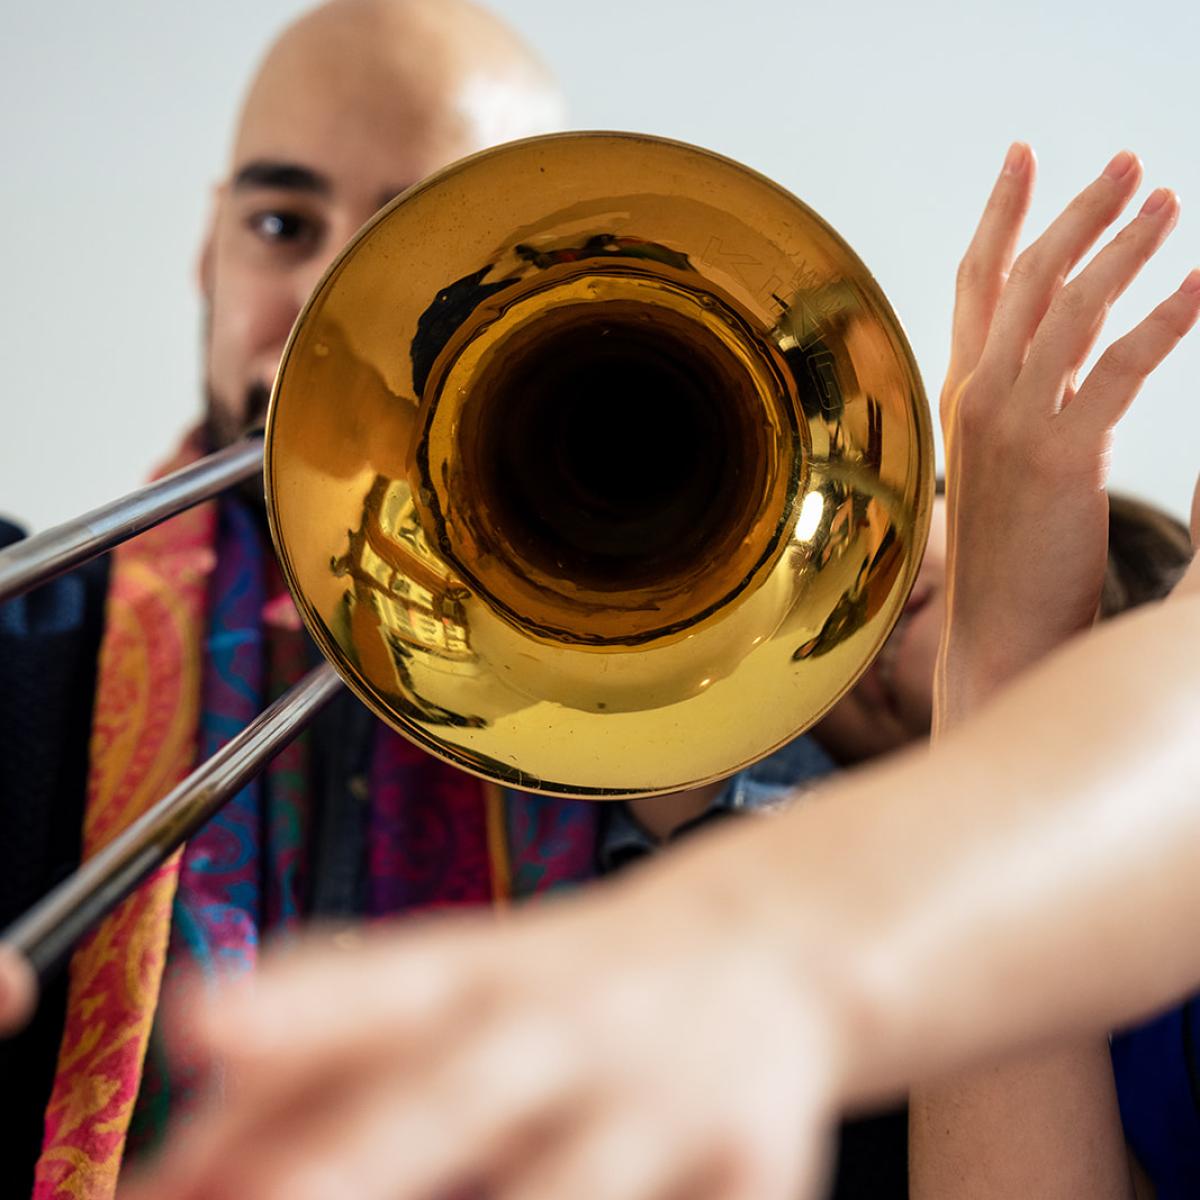 A person plays a trombone while another reaches soft hands around the bell of the instrument.